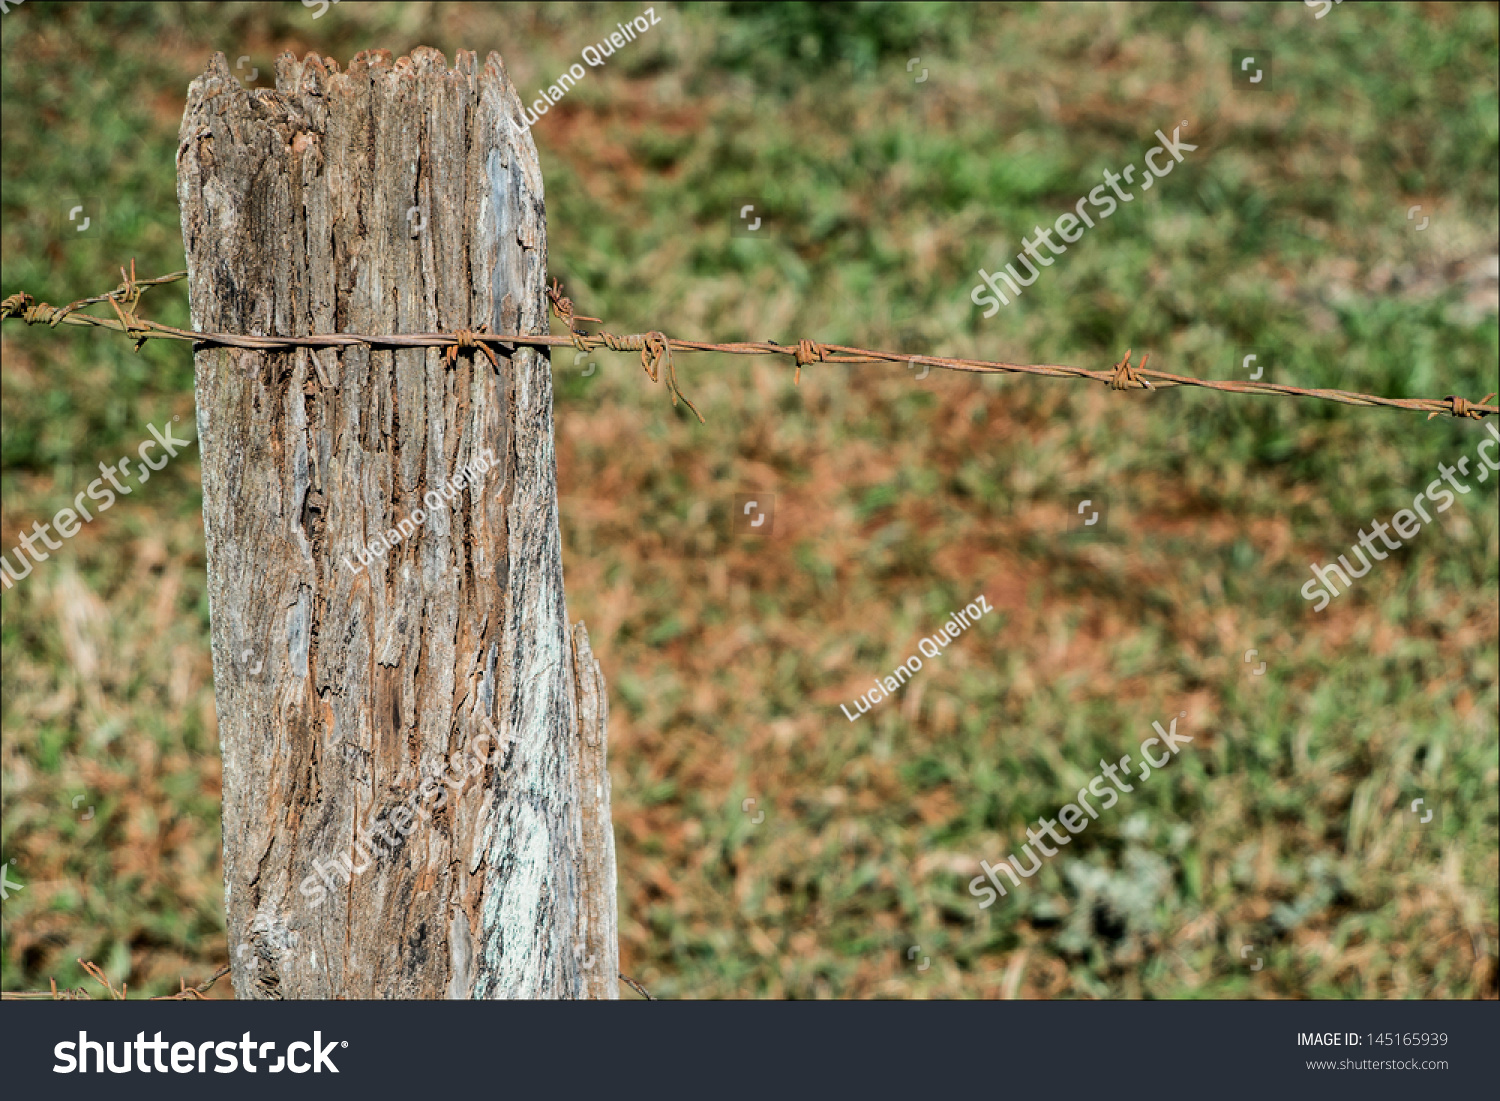 Wooden fence with barbed wire 2 #145165939